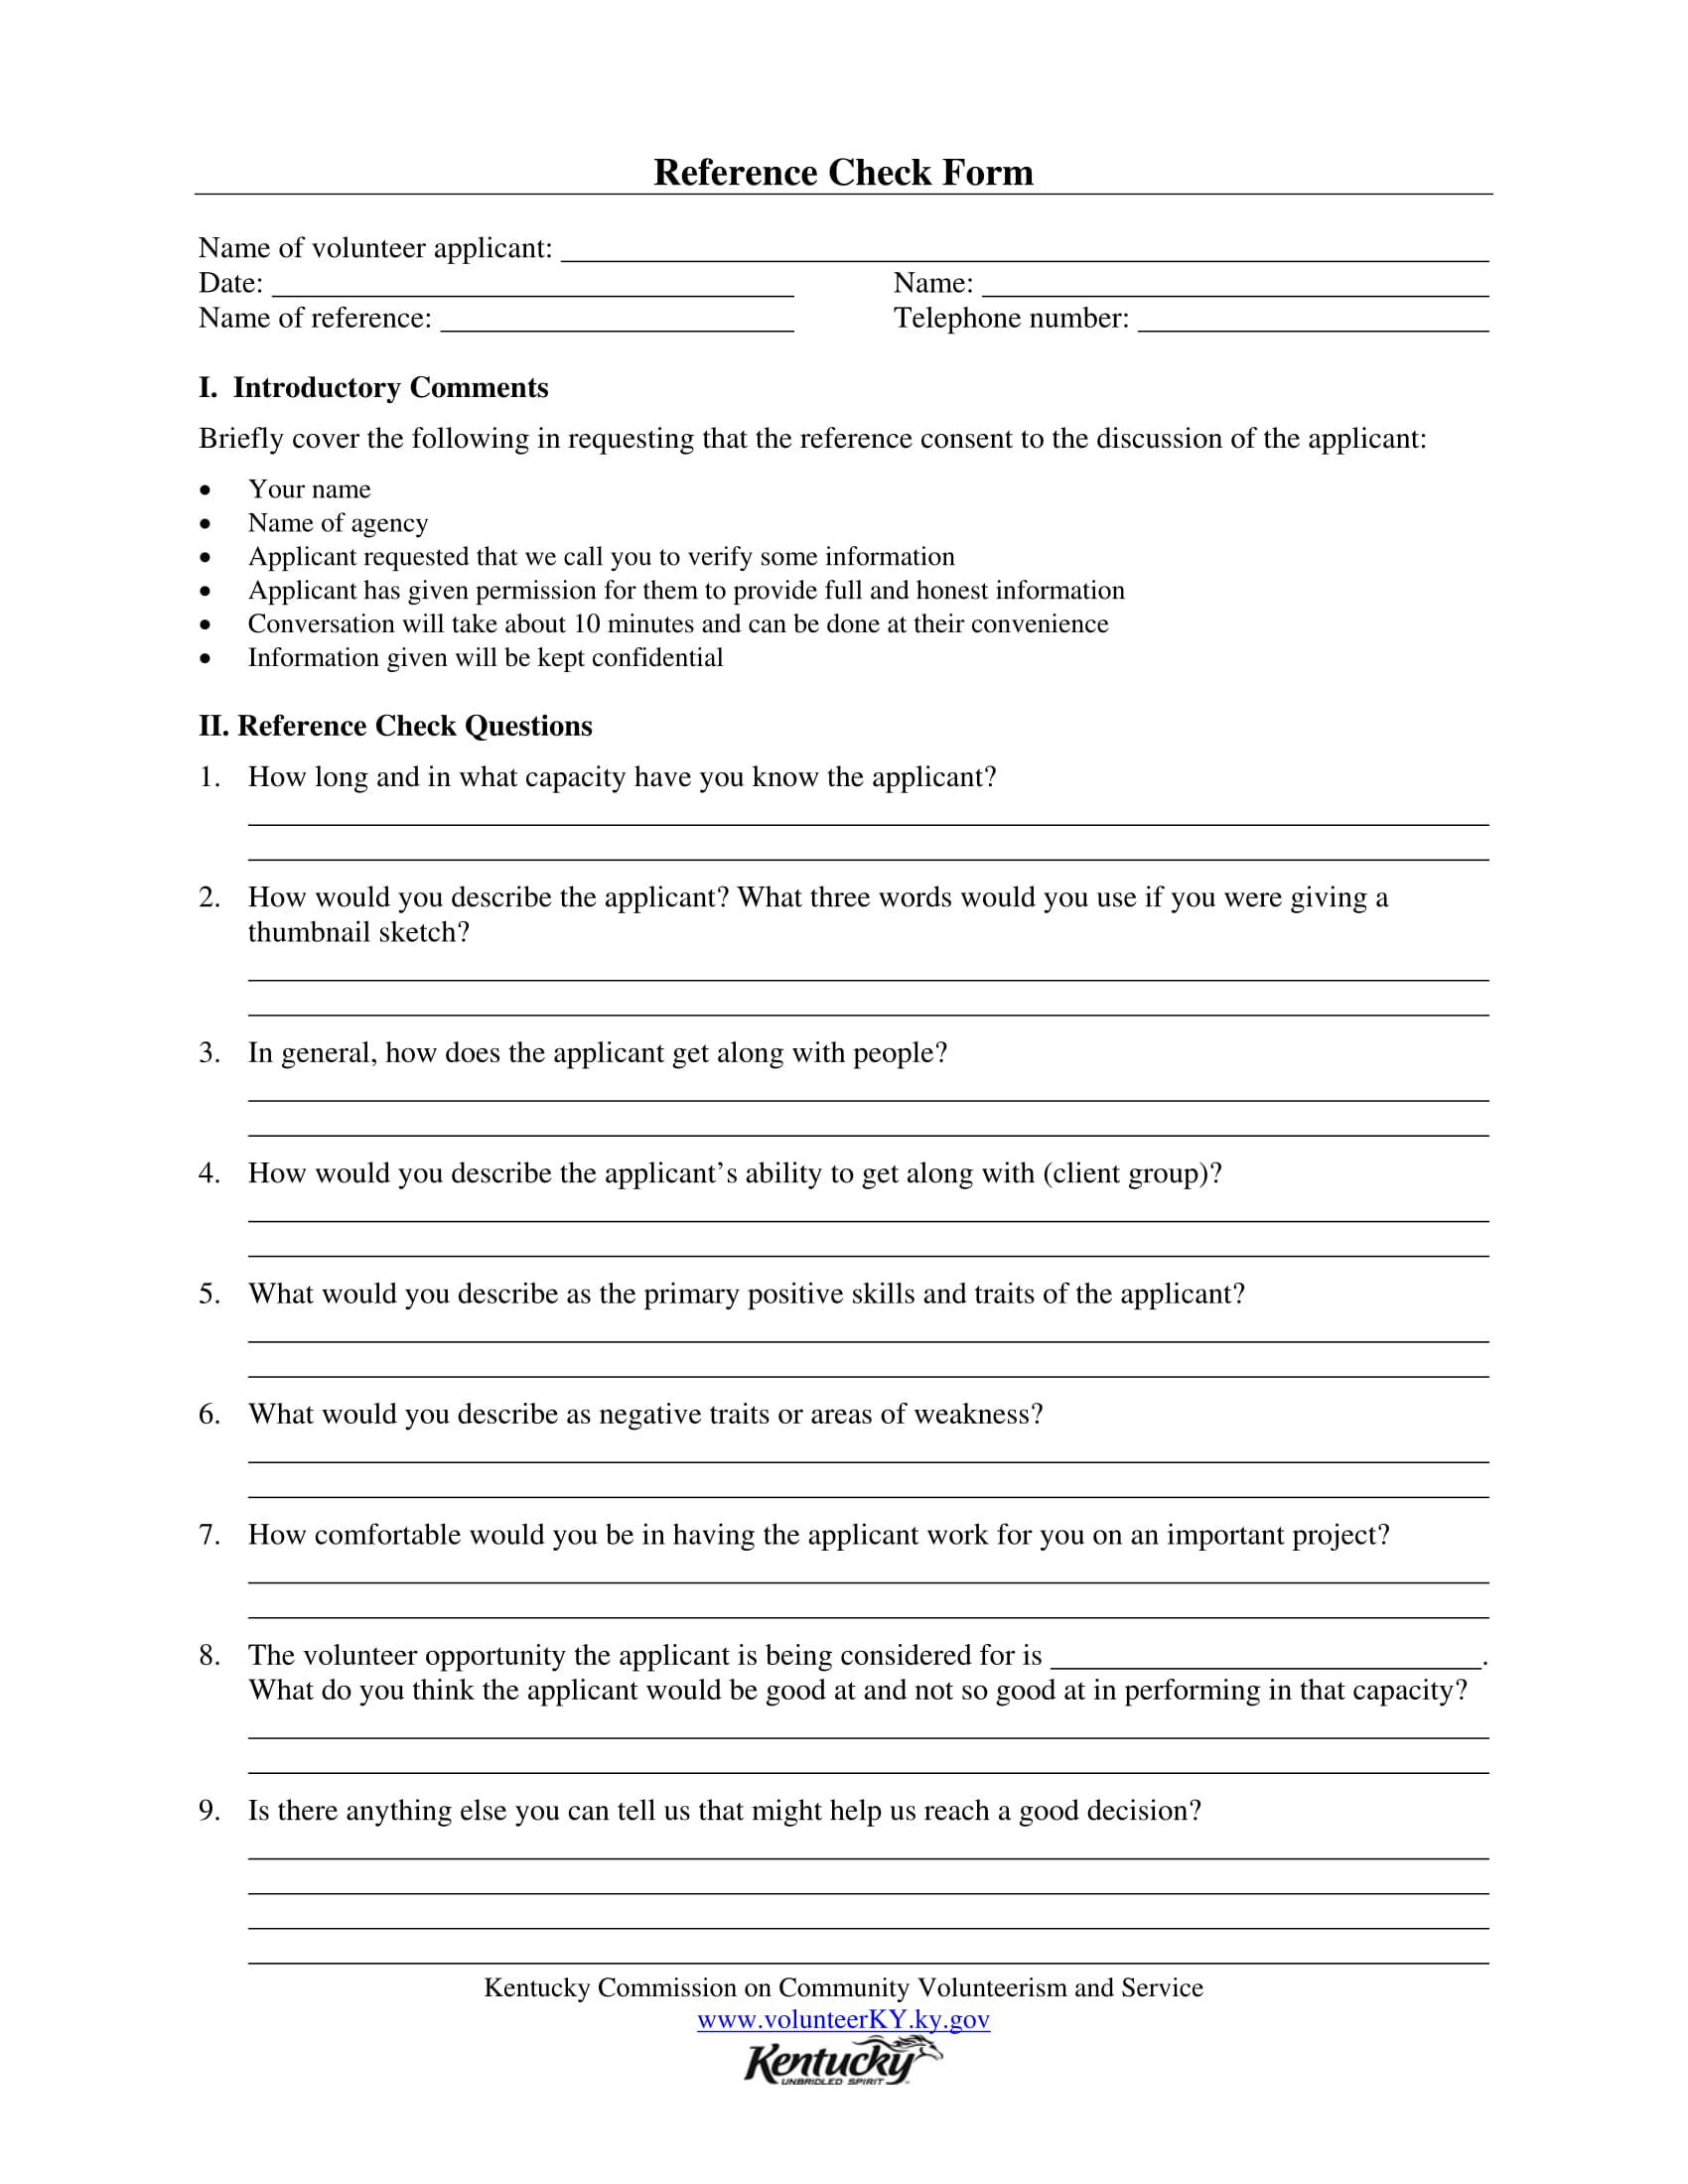 printable-reference-check-questions-template-printable-templates-free